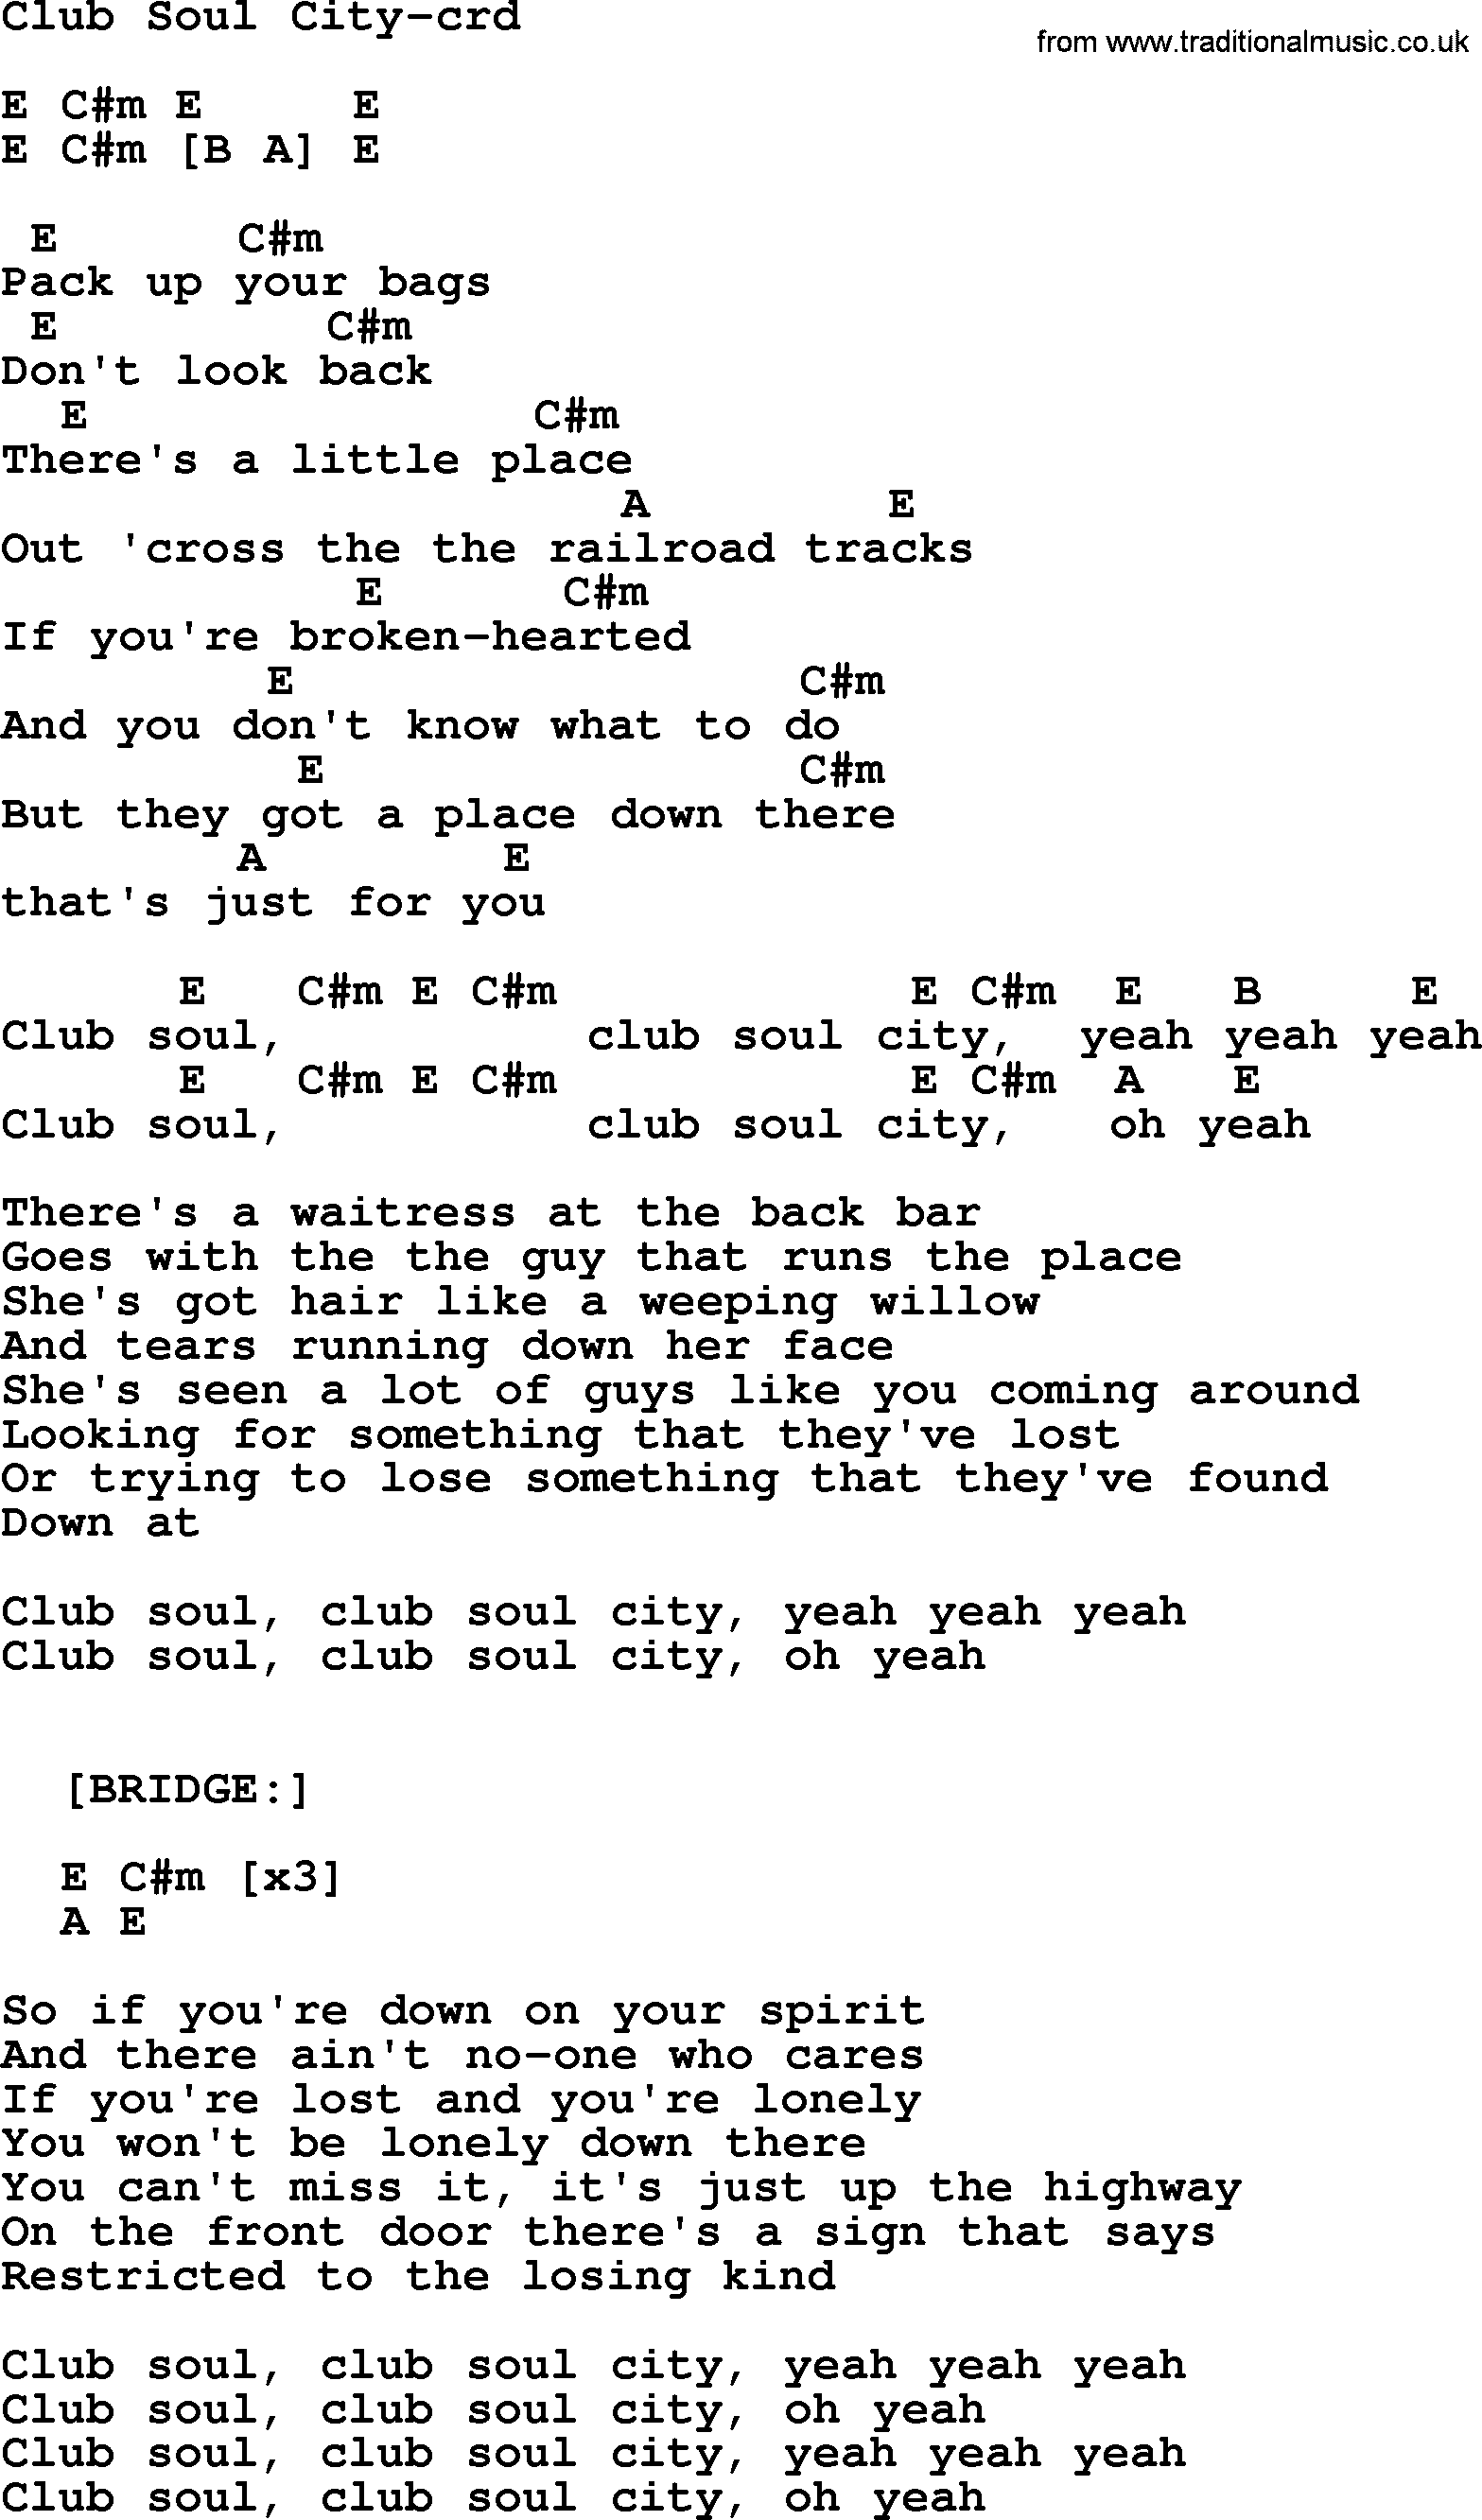 Bruce Springsteen song: Club Soul City, lyrics and chords